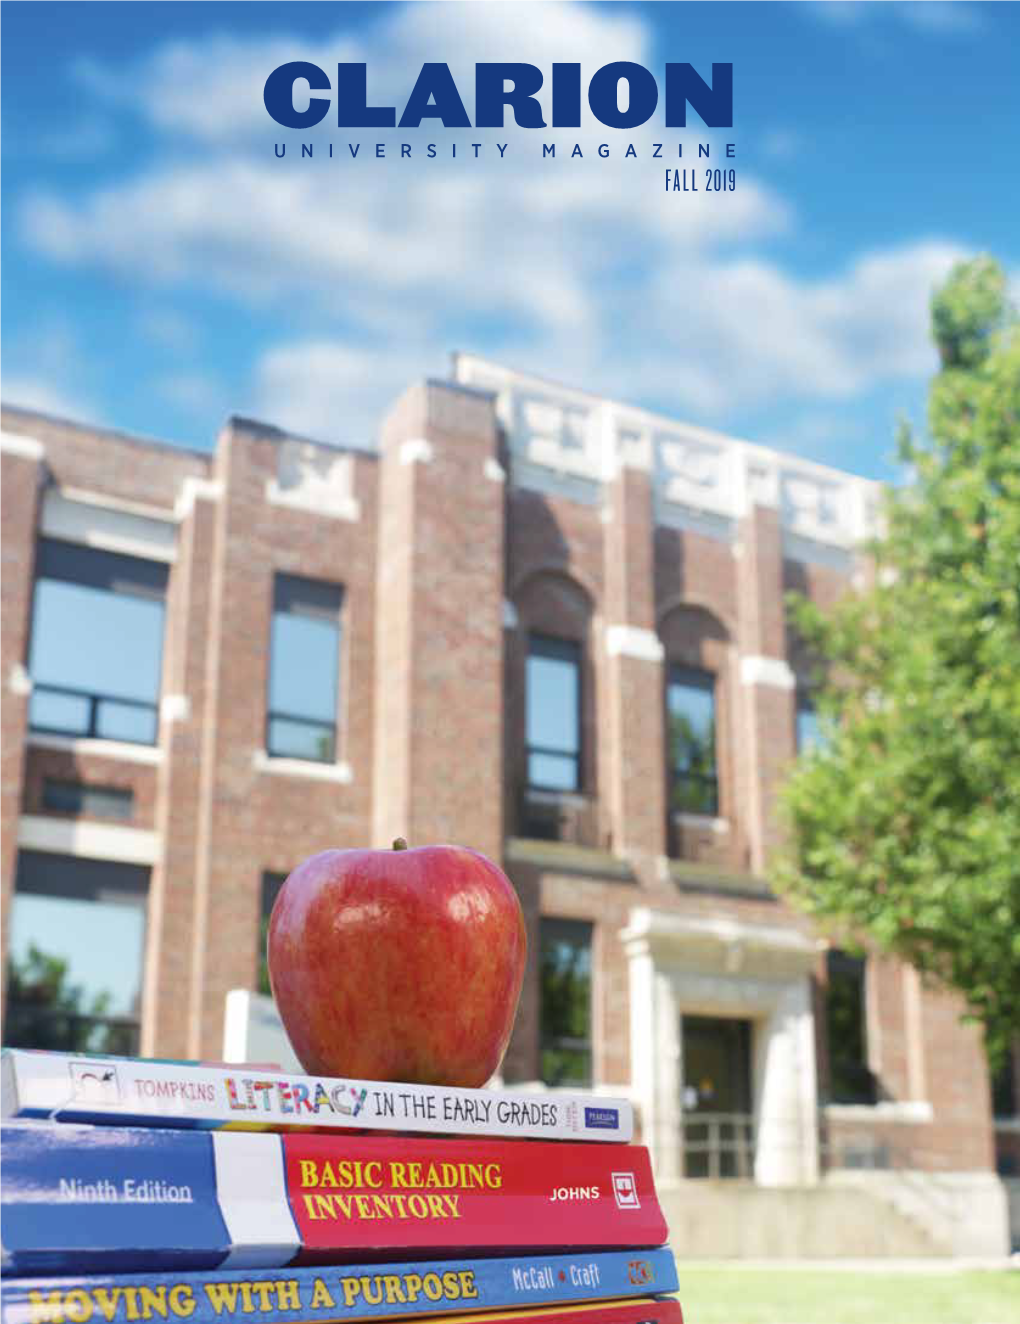 Clarion University Magazine Fall 2019 Fall 2019 Volume 6 Clarion Number 2 Features Departments